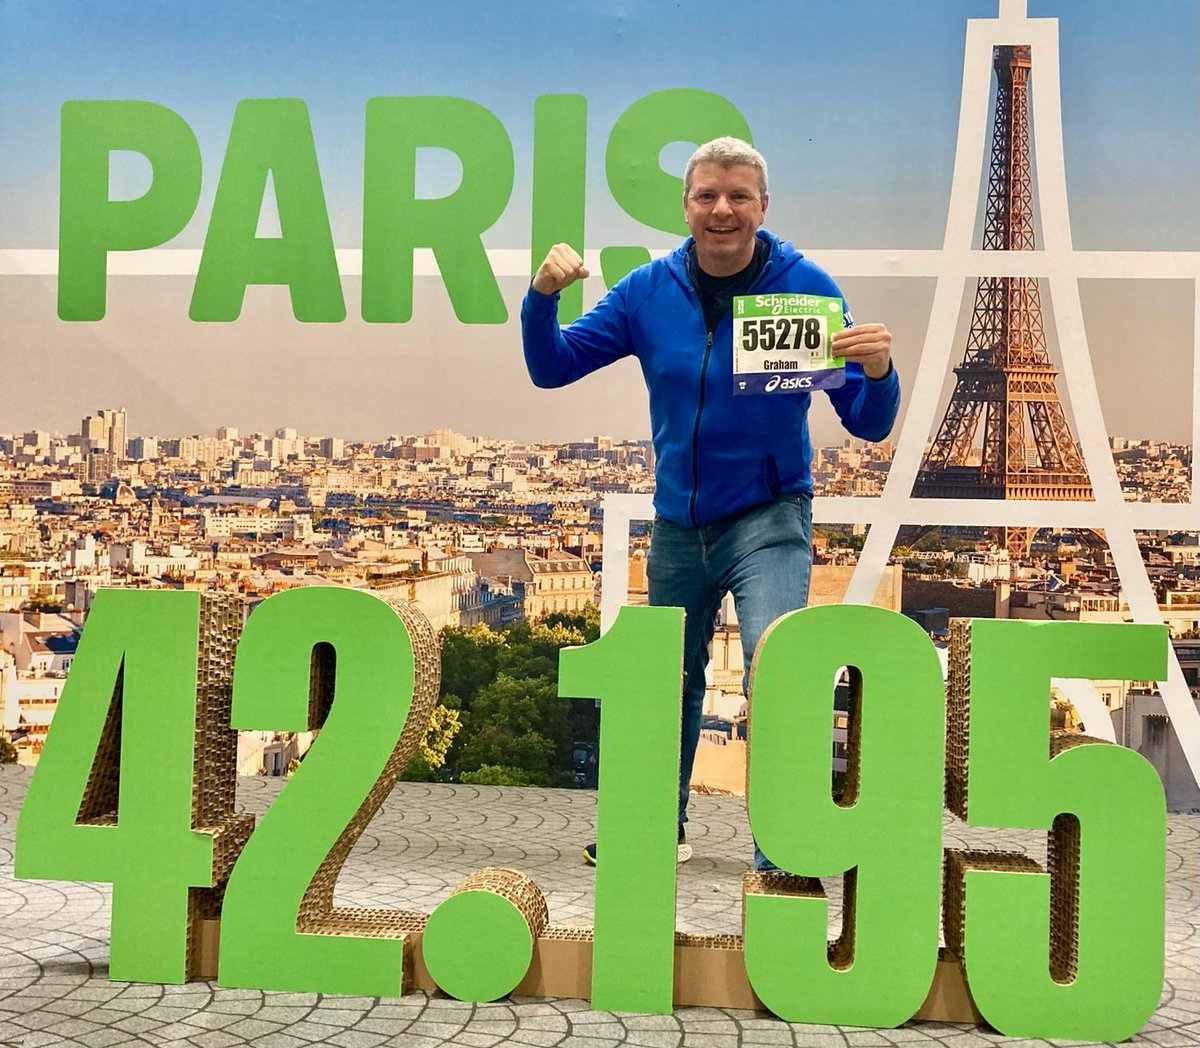 There's more than one show in Paris this year! Sanctuary Runners founder Graham Clifford is ready for tomorrow's @parismarathon Graham is raising funds for the @IrishRefugeeCo and you can support him here: gofund.me/5aa3a1e4